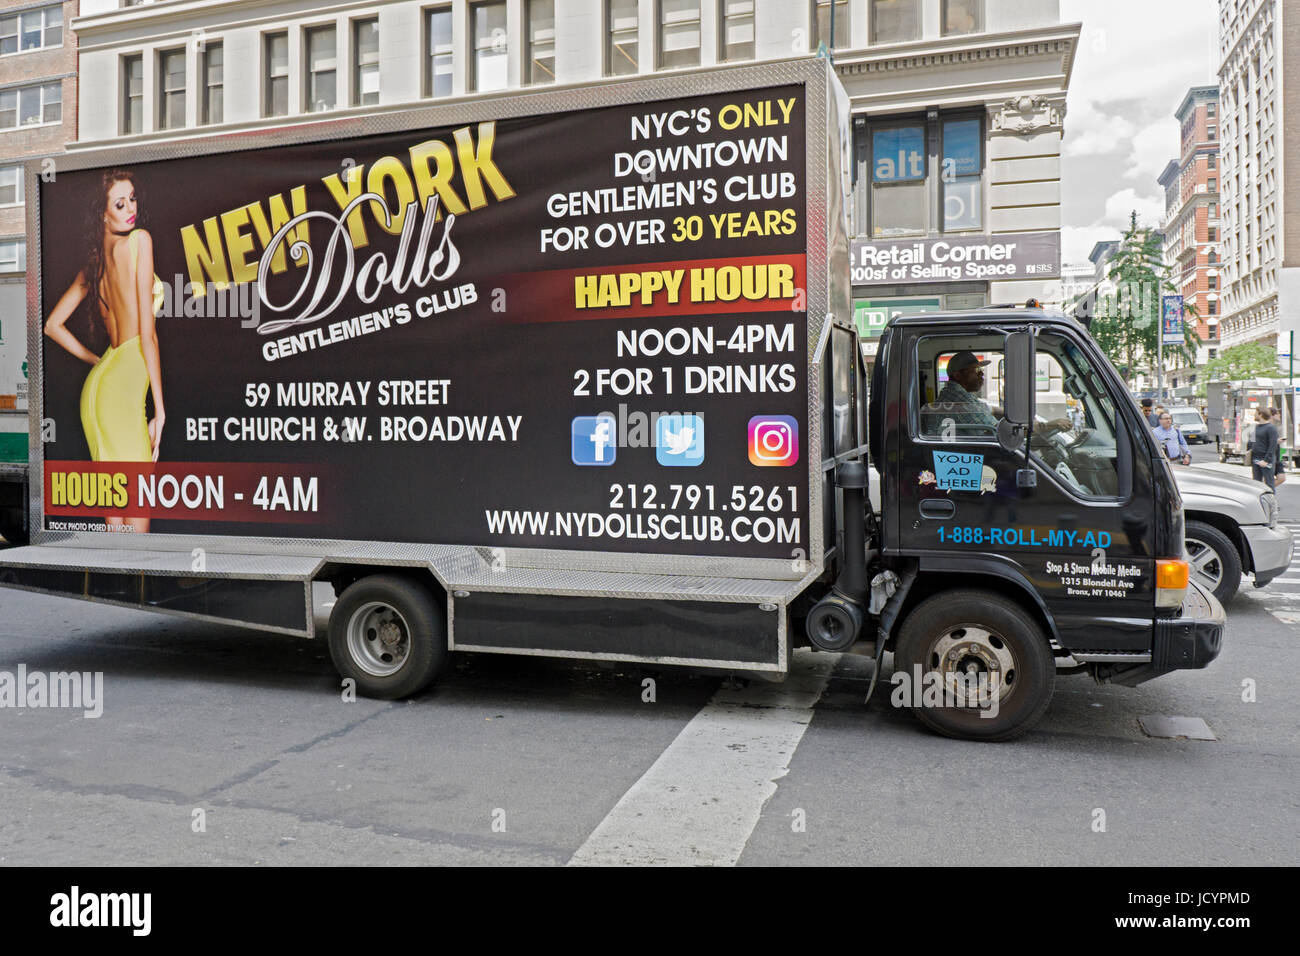 A mobile ad for a strip club on a truck on West 14th Street in lower Manhattan, New York City. Stock Photo